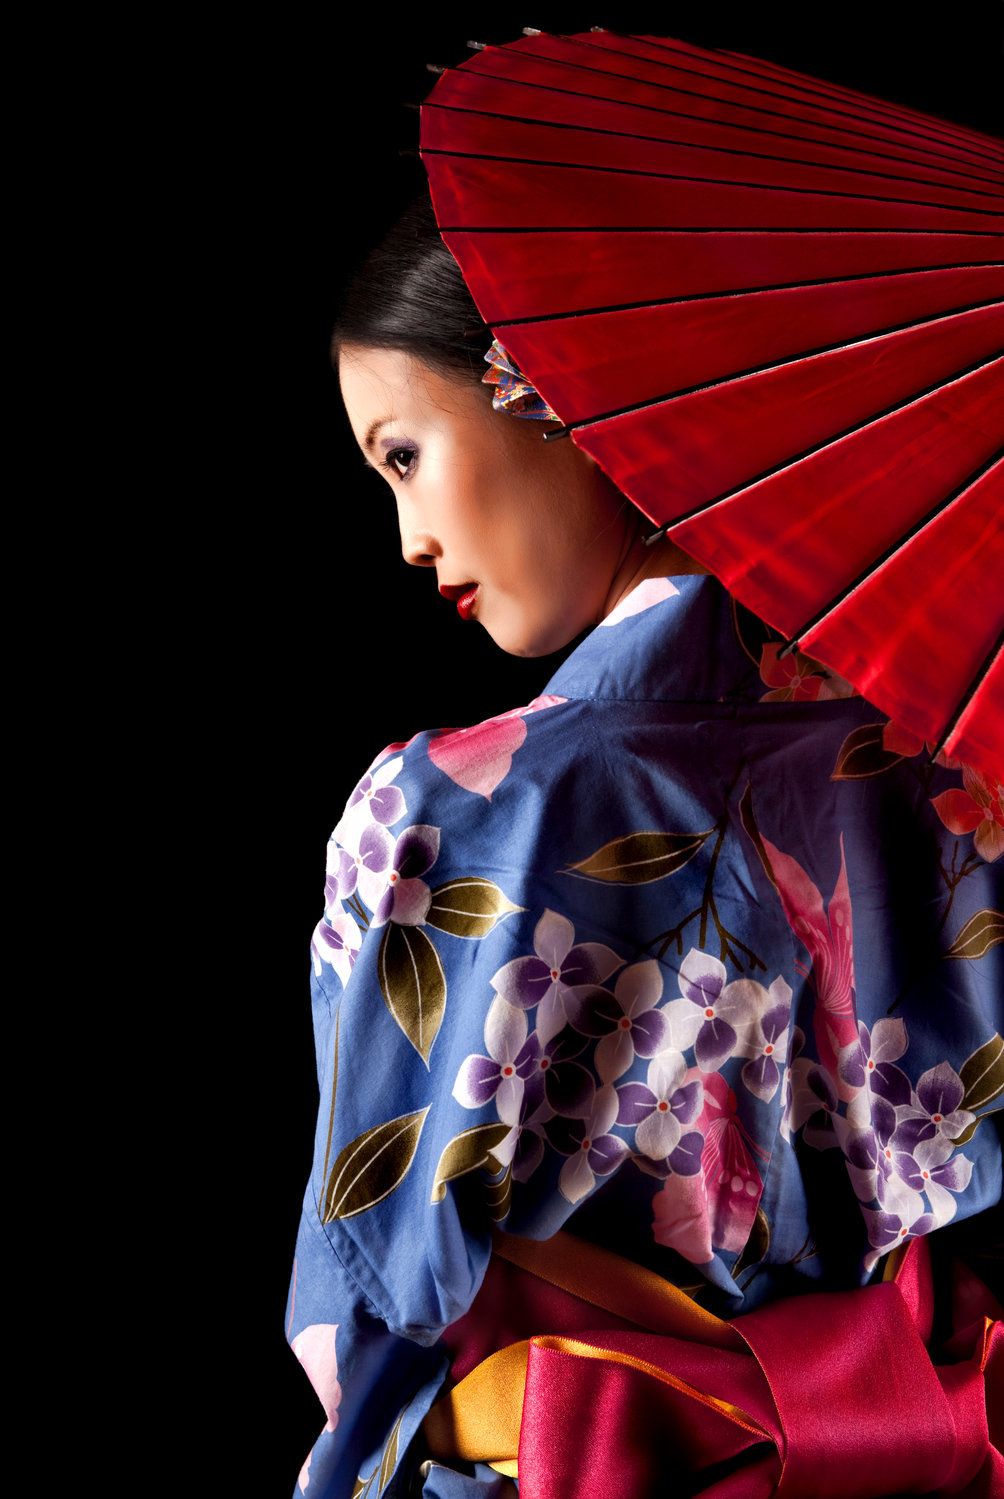 Long Island Lyric Opera stages "Madama Butterfly" at the Madison Theatre on Oct. 5 and 6.